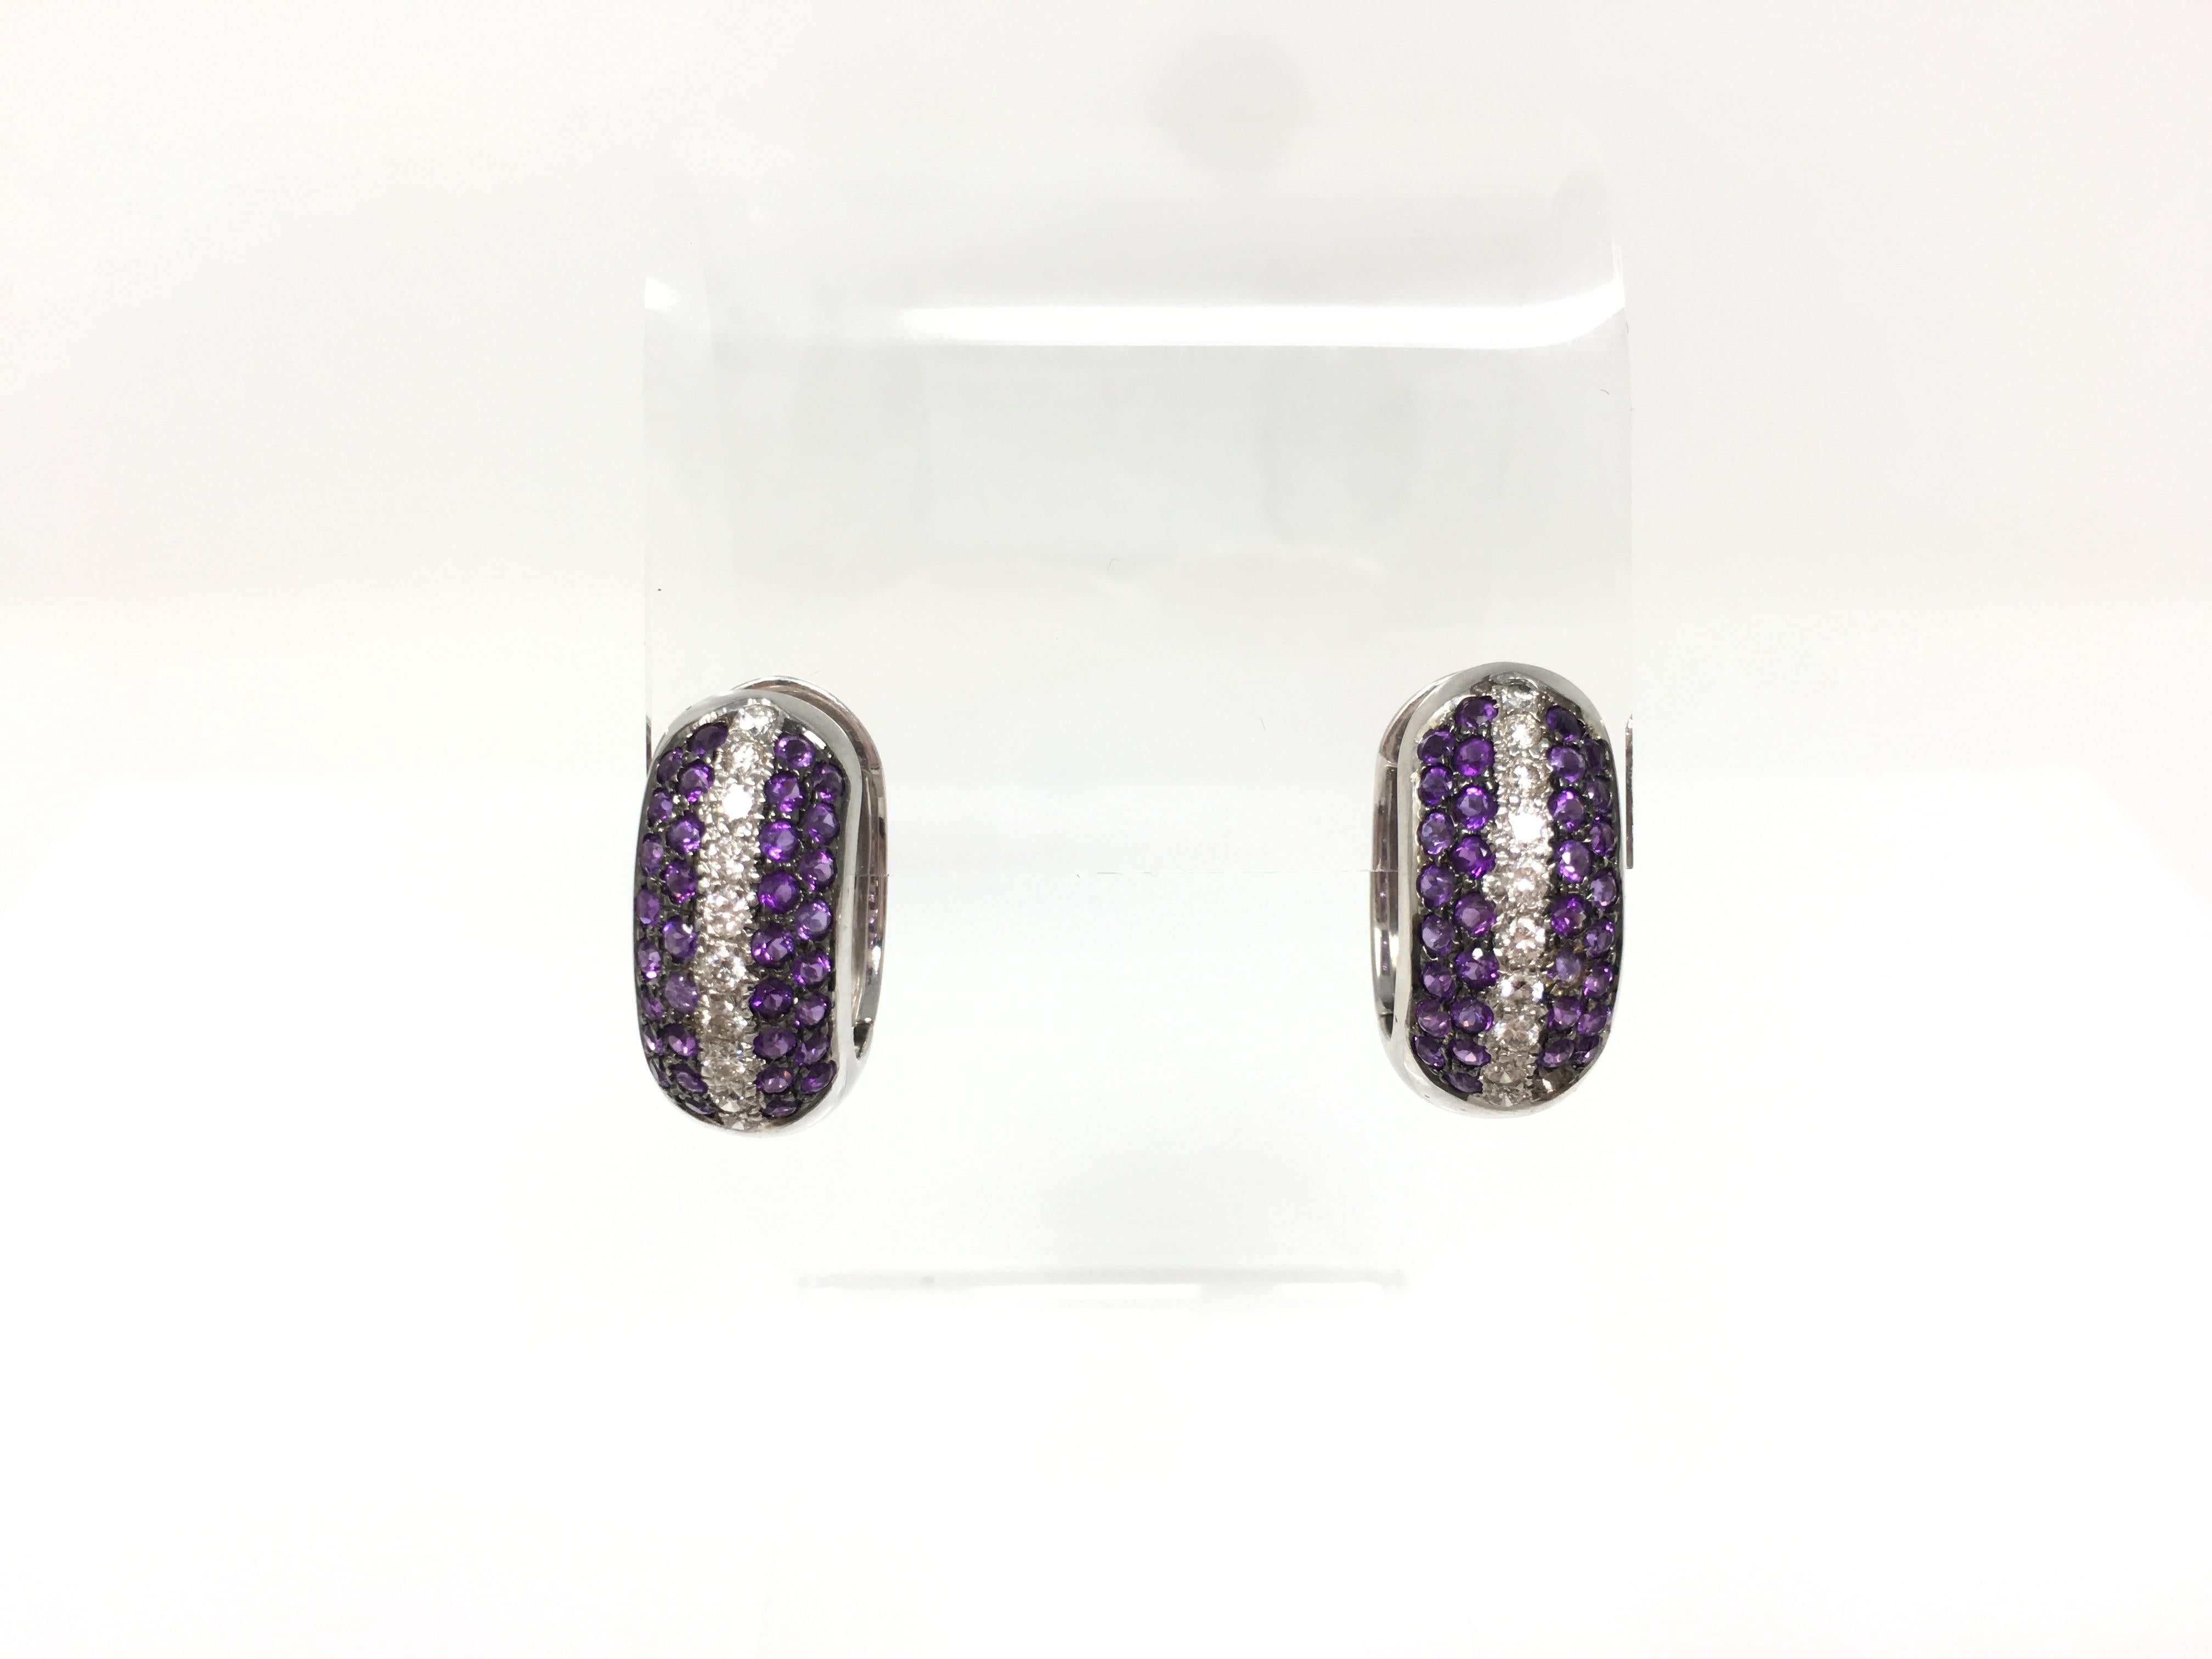 Amethyst, 18k white gold and diamond hoop earrings. The amethyst weigh 2.50 carat approx and diamond weigh 1 carat with GH color and VS clarity. These stylish and beautiful hoop earrings are hand custom made in 18 K white gold by moguldiam Inc. The